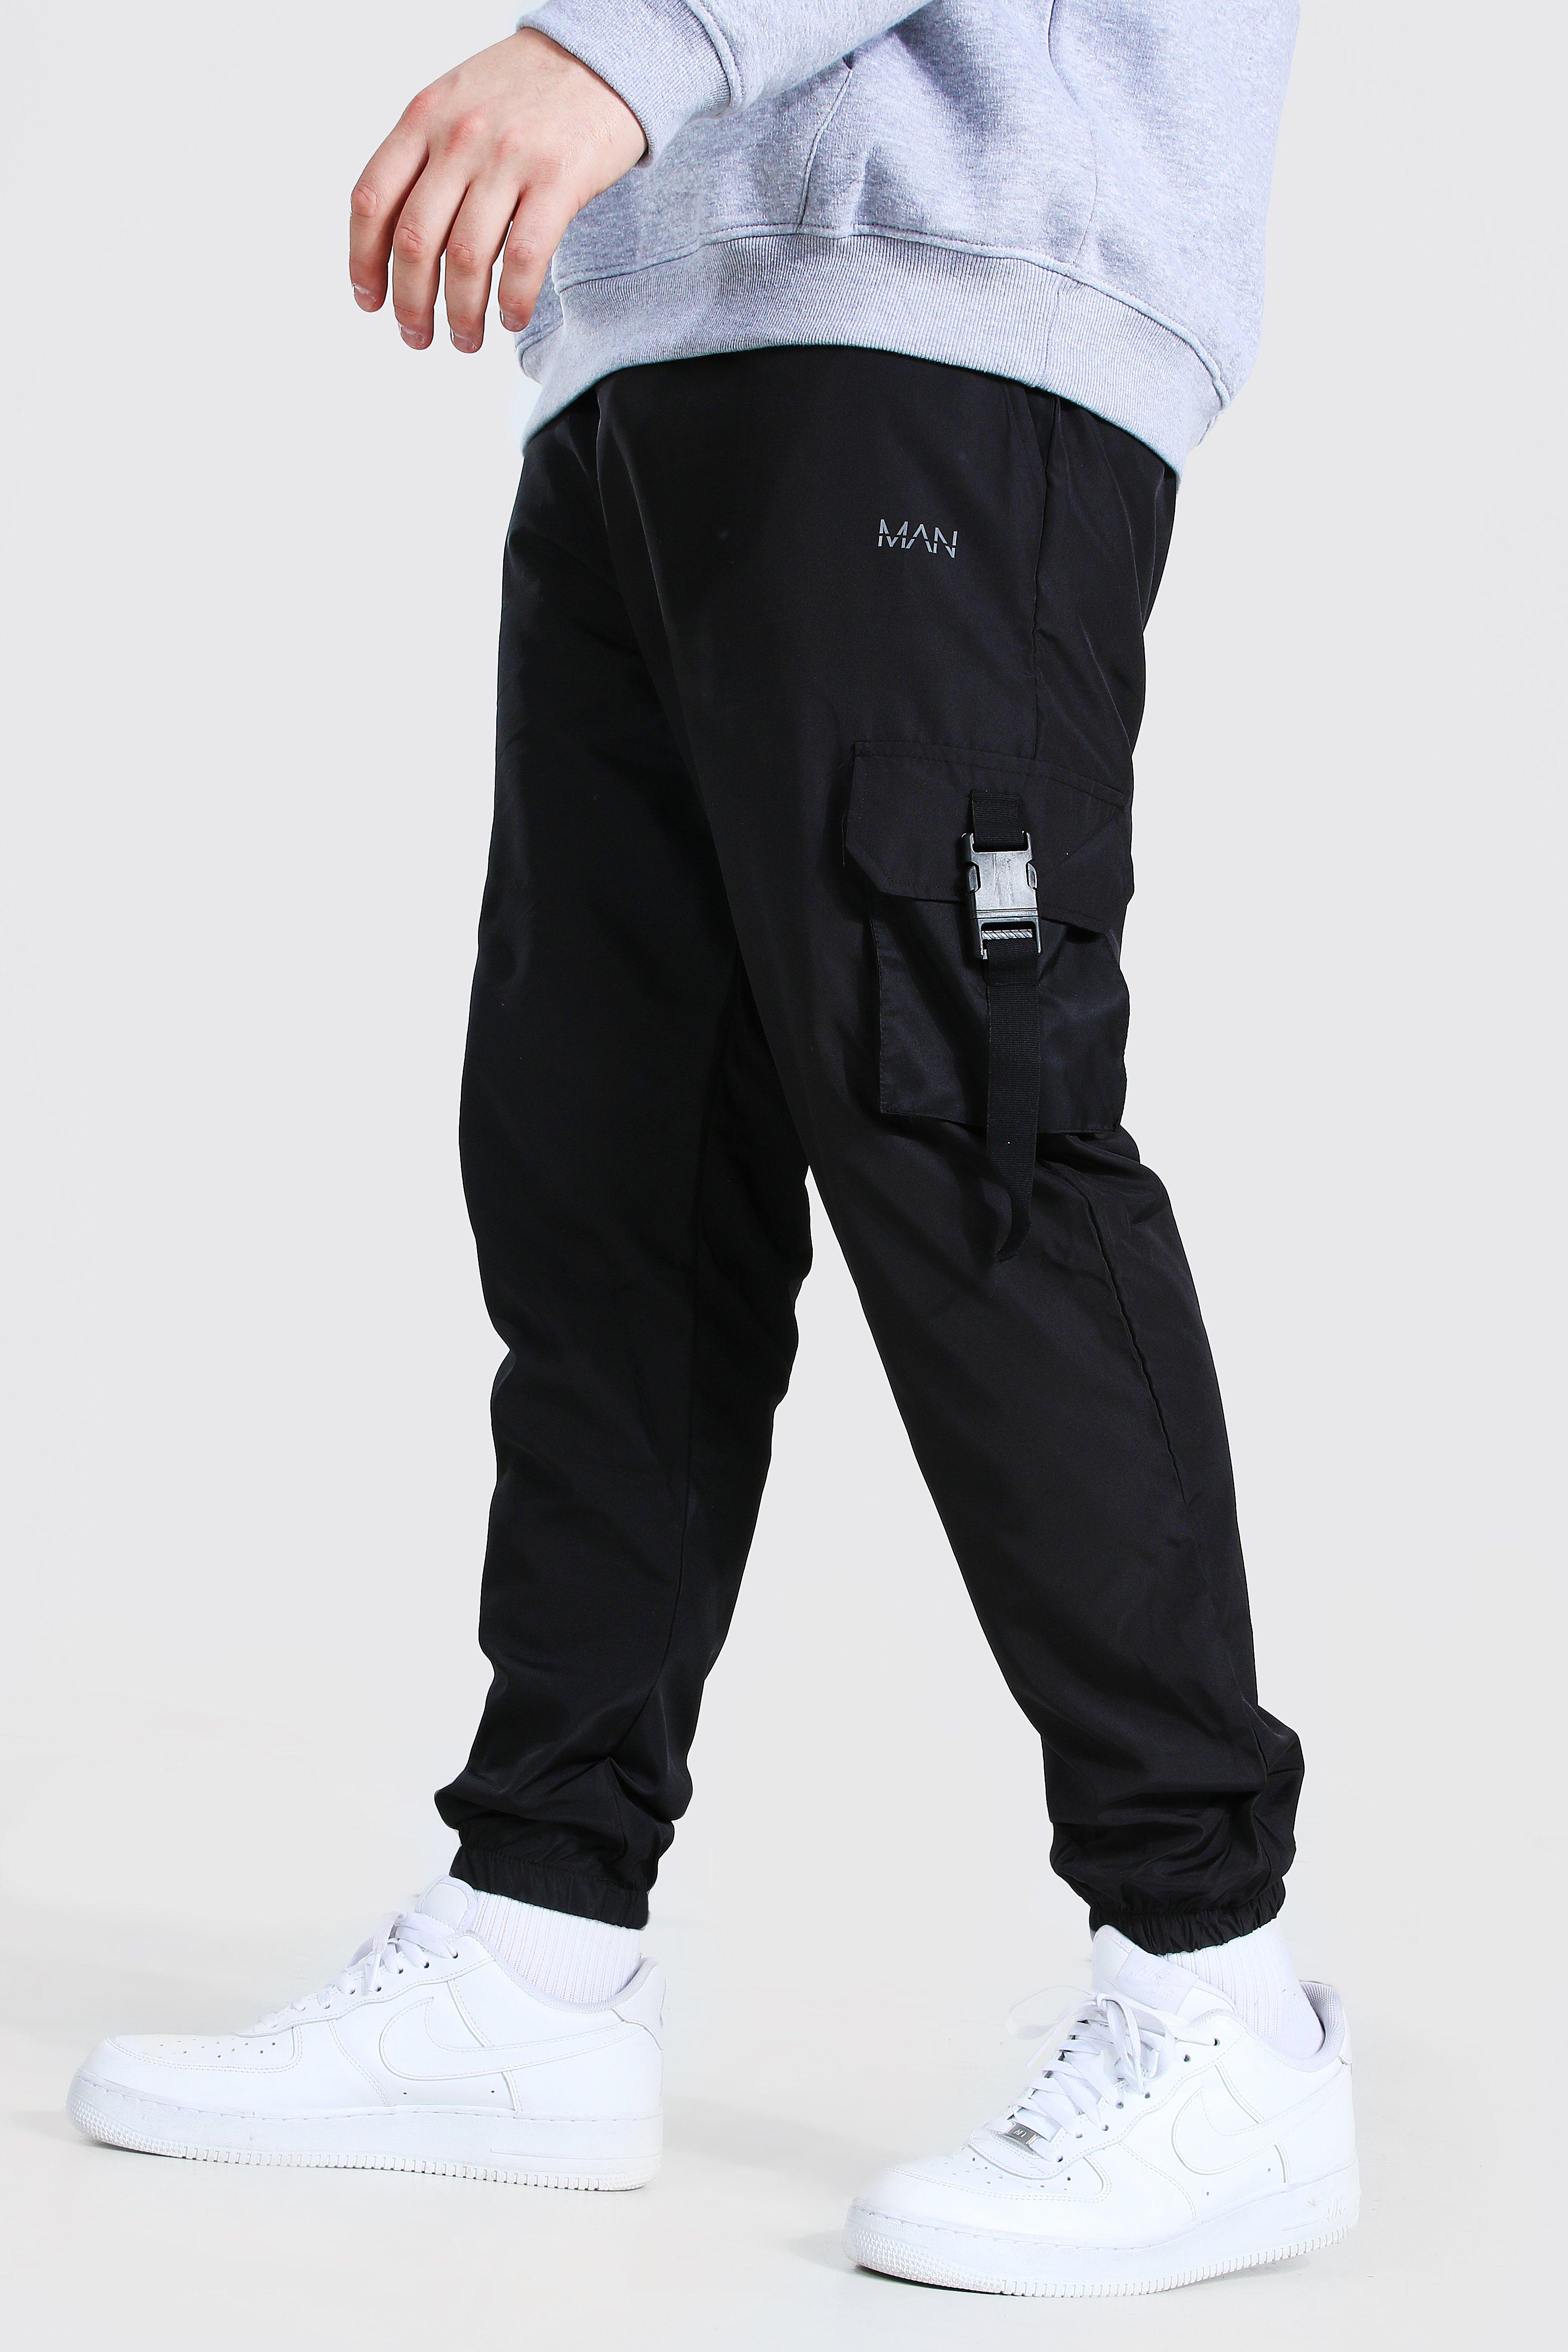 Original MAN Crinkle Bungee Cord Jogger Trouser Homme